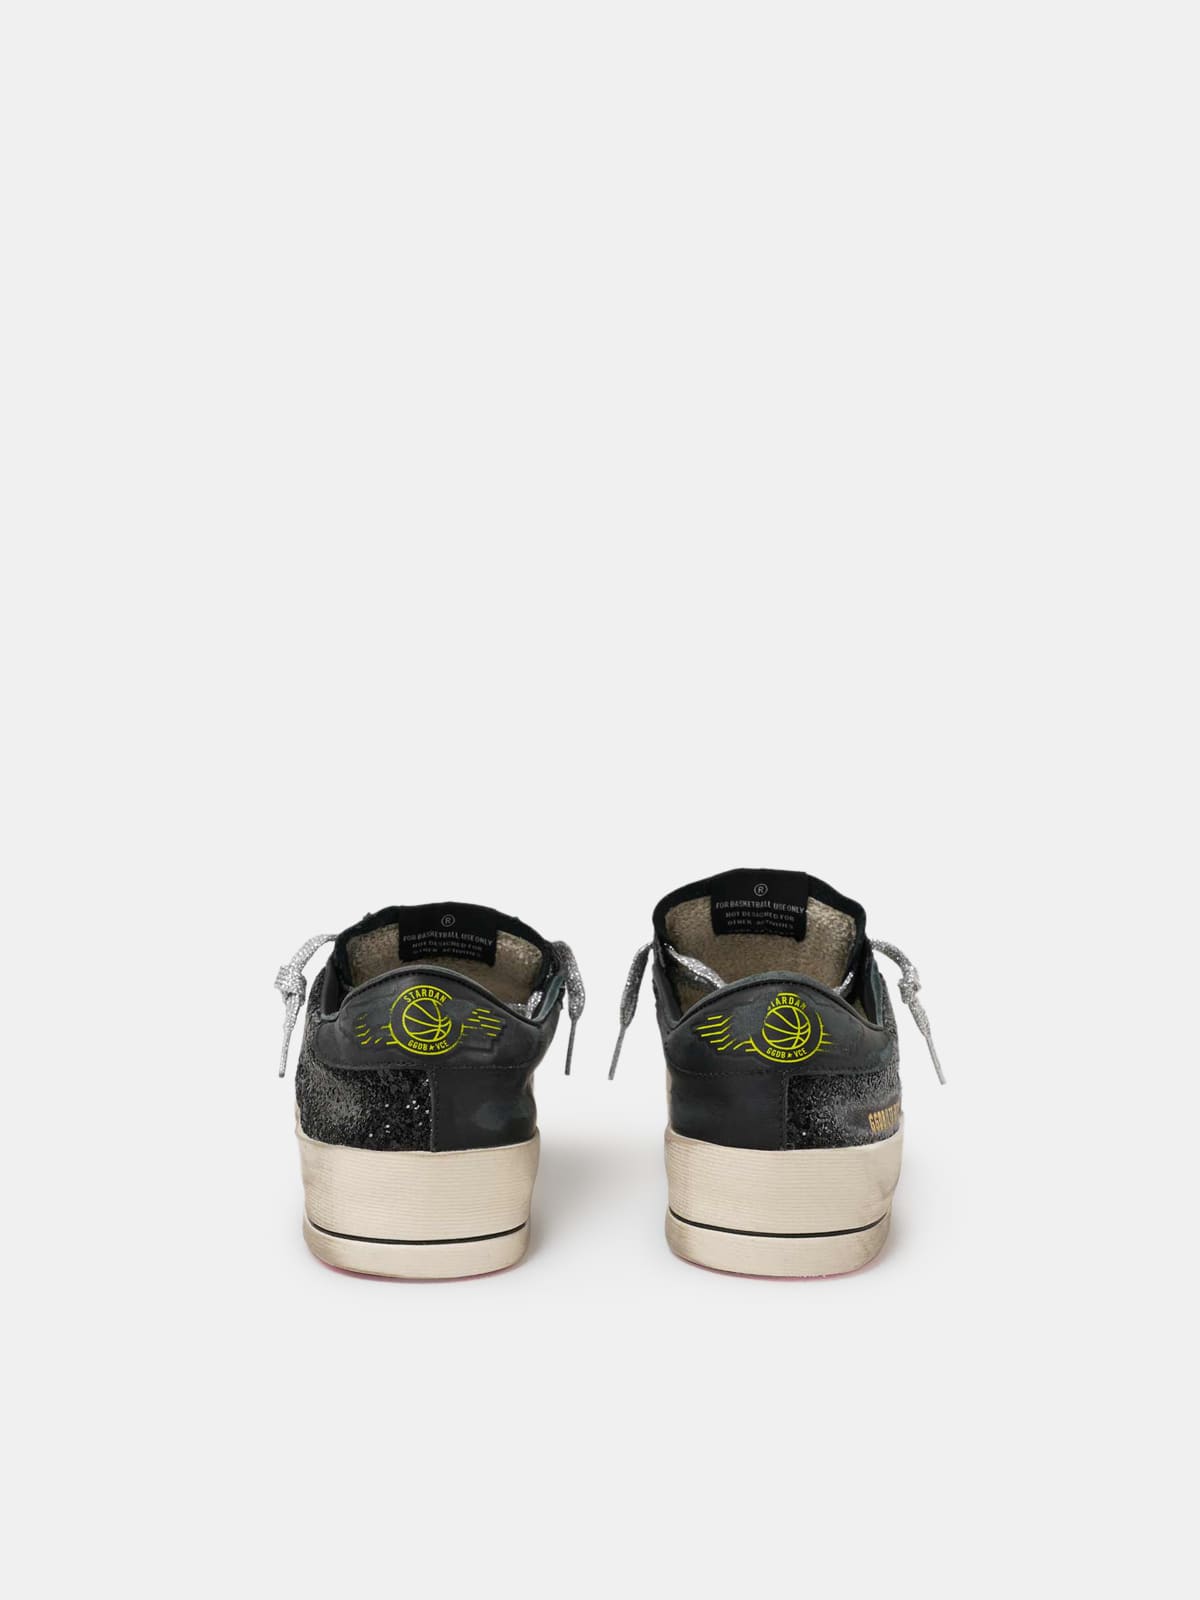 Stardan sneakers with glittery upper, fluorescent yellow star and mesh  inserts | Golden Goose